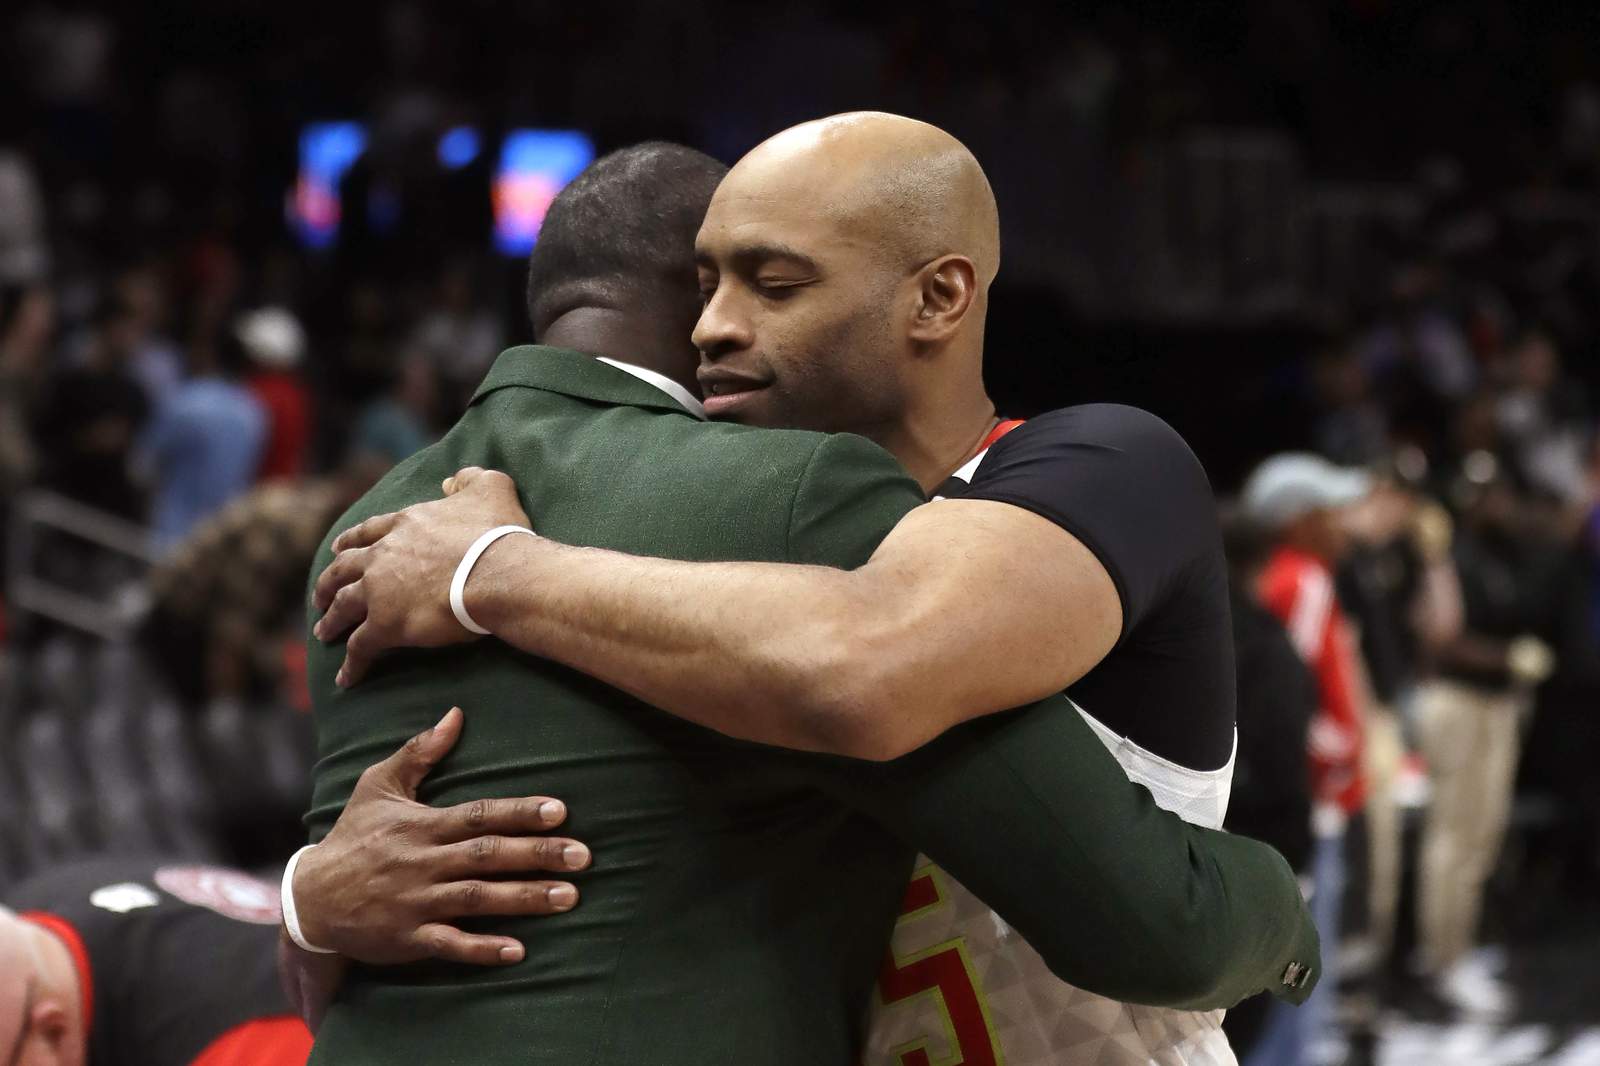 Vince Carter, 43, retires after record 22 NBA seasons